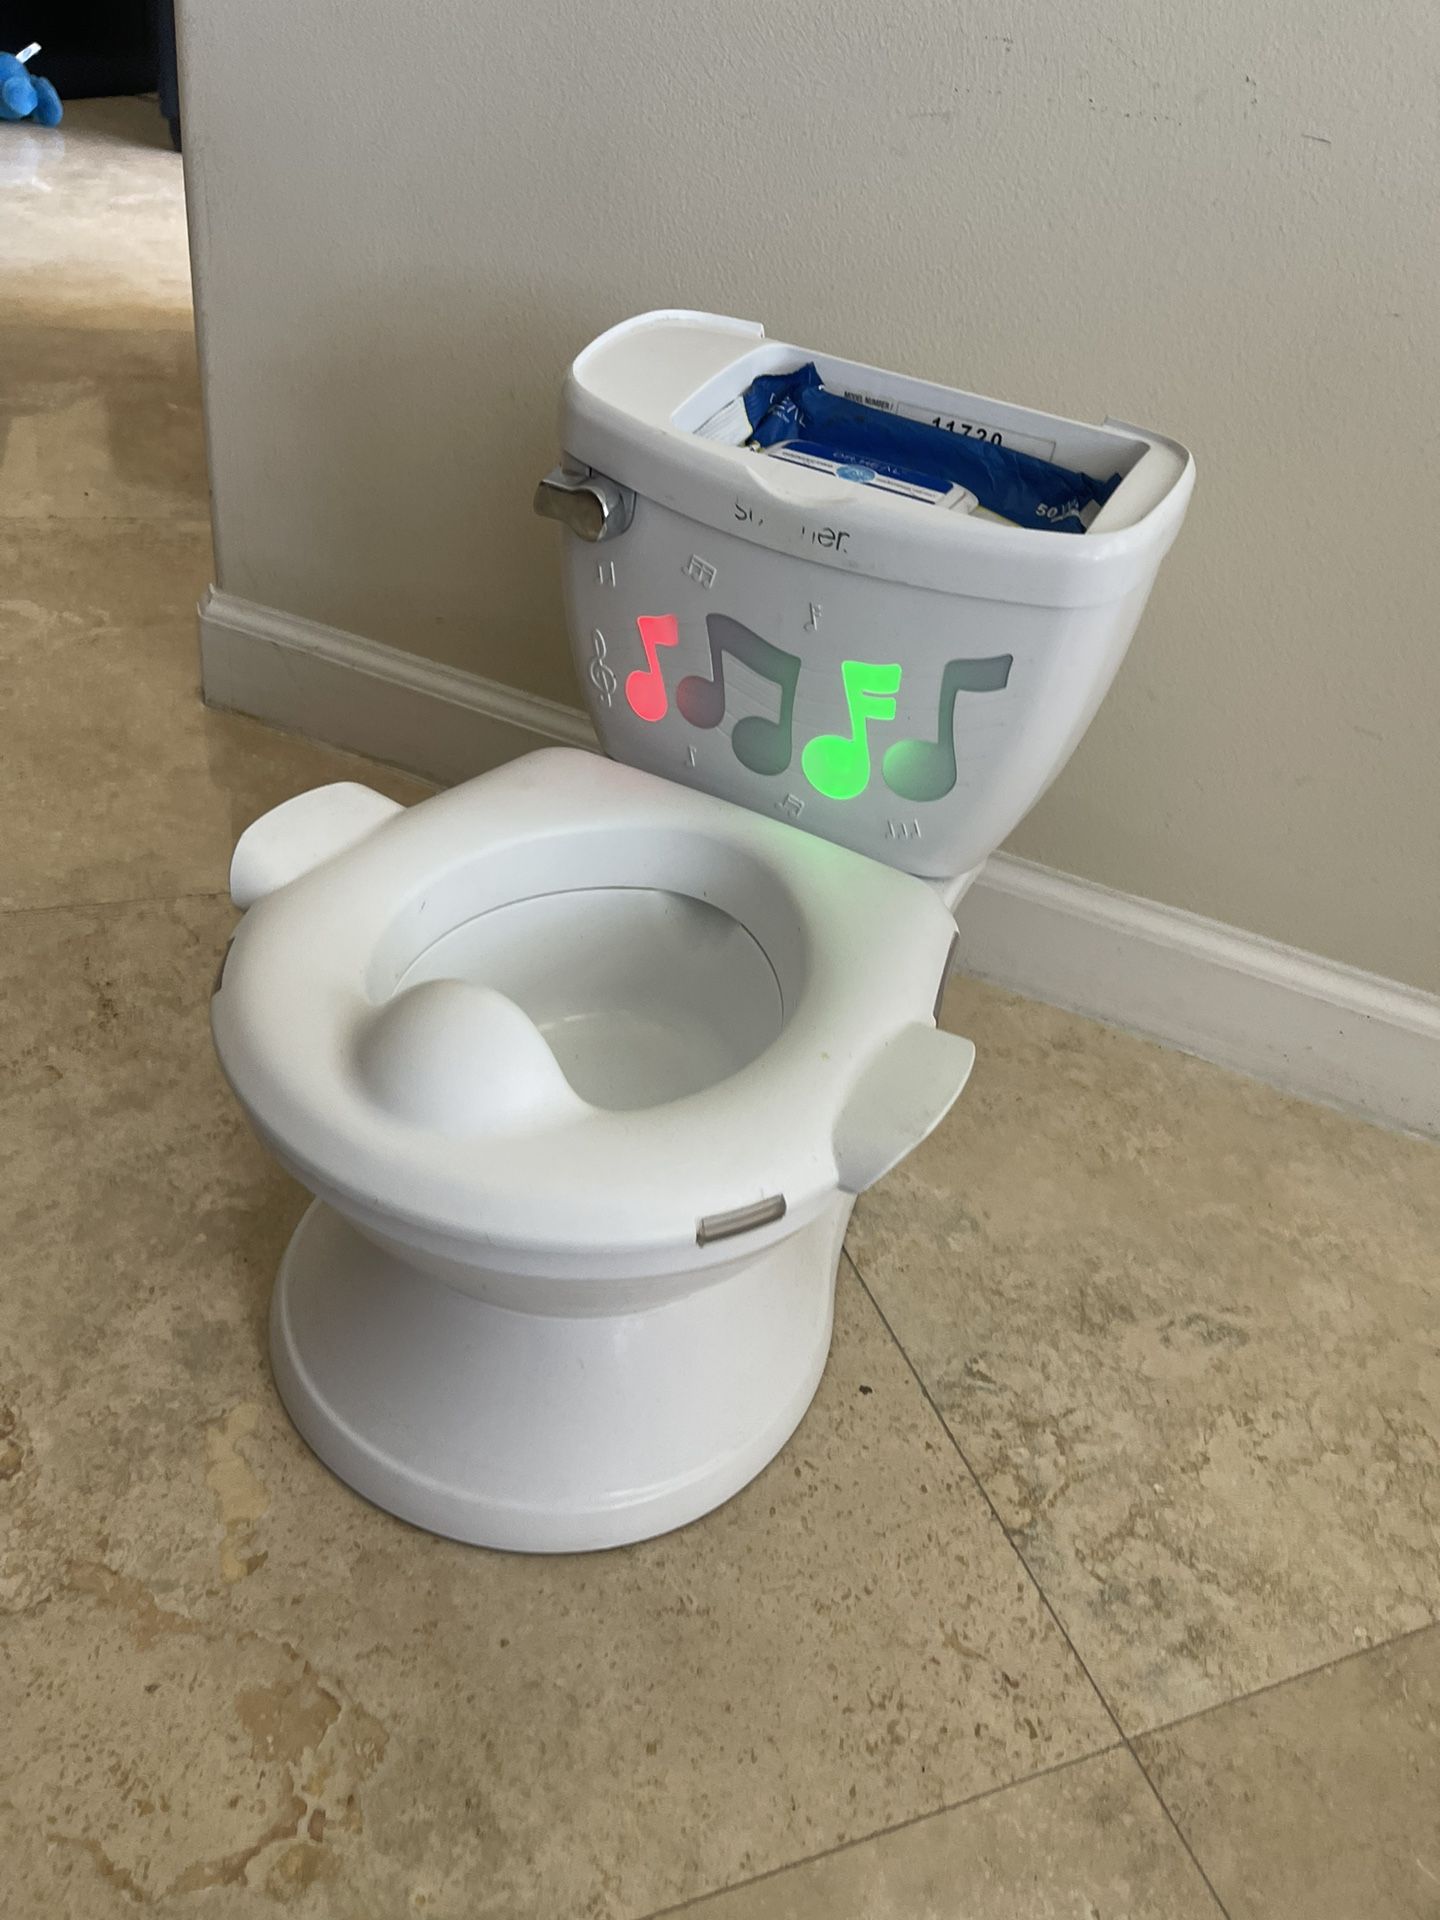 Toddler Potty Seat with Lights - LIKE NEW 